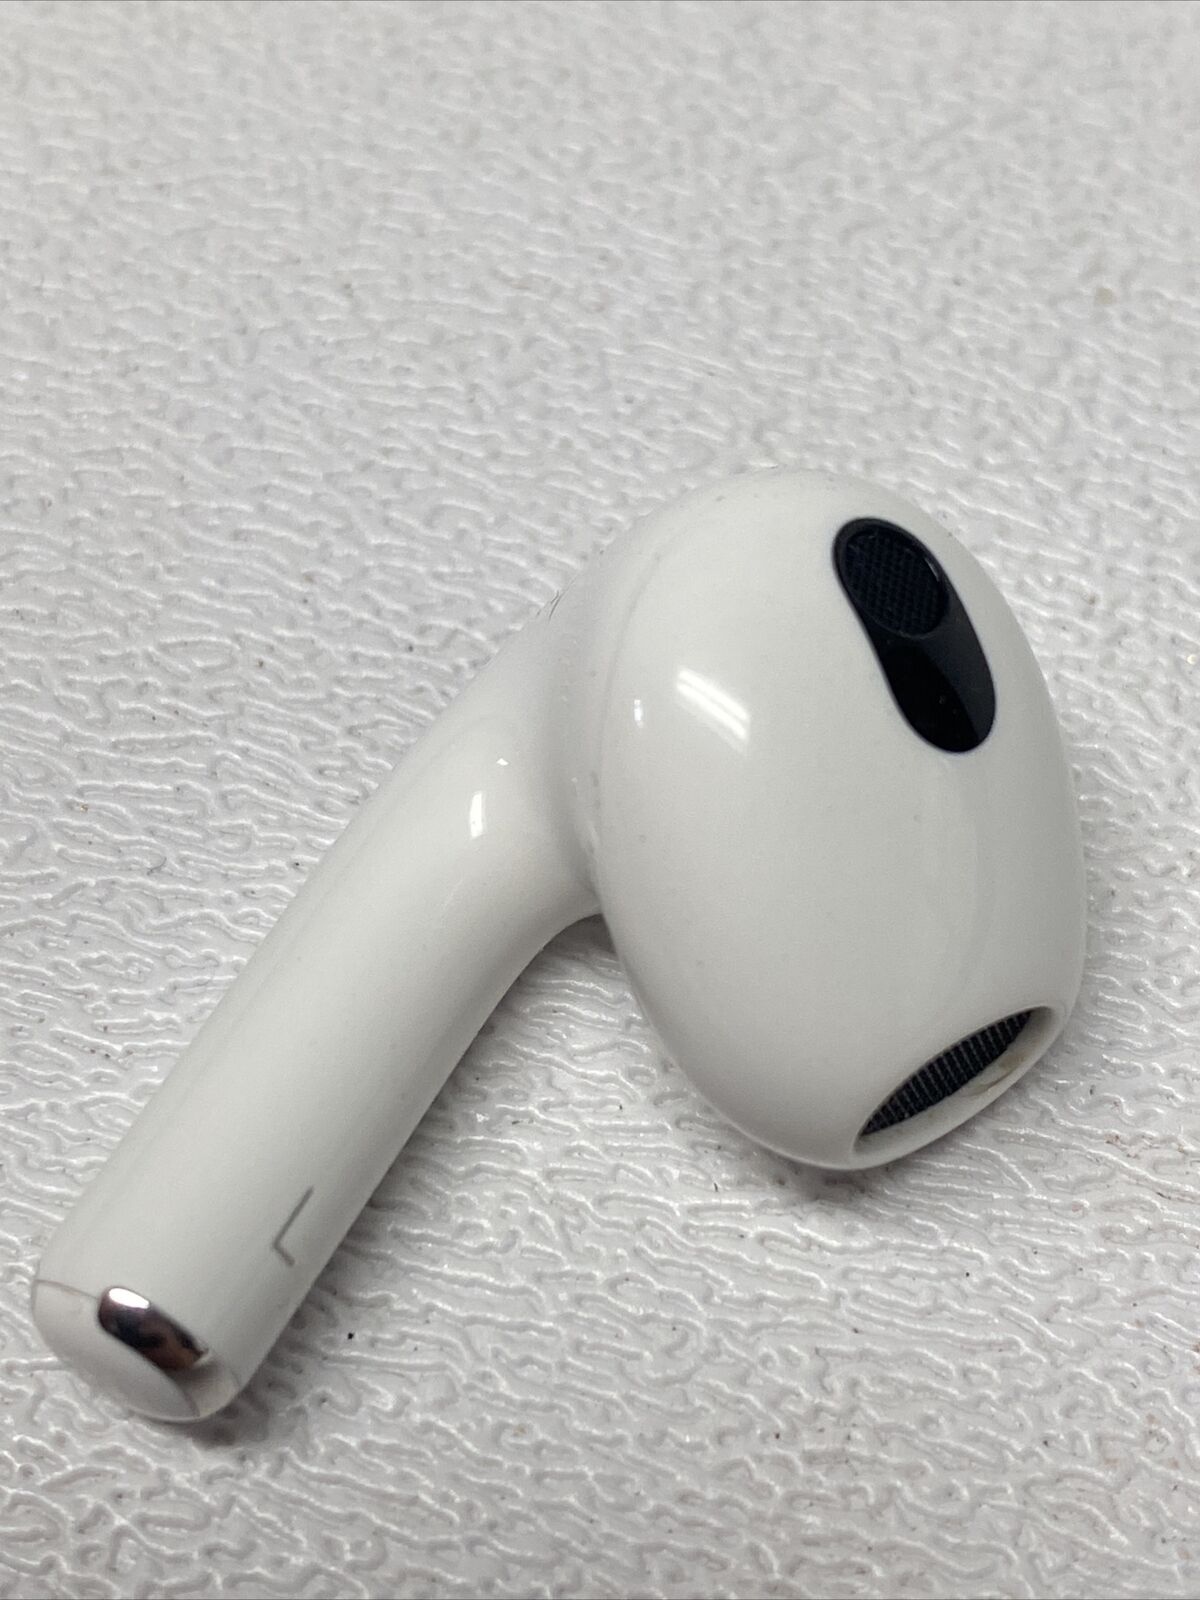 Apple AirPods 3rd Generation Wireless In-Ear Headset - White for 